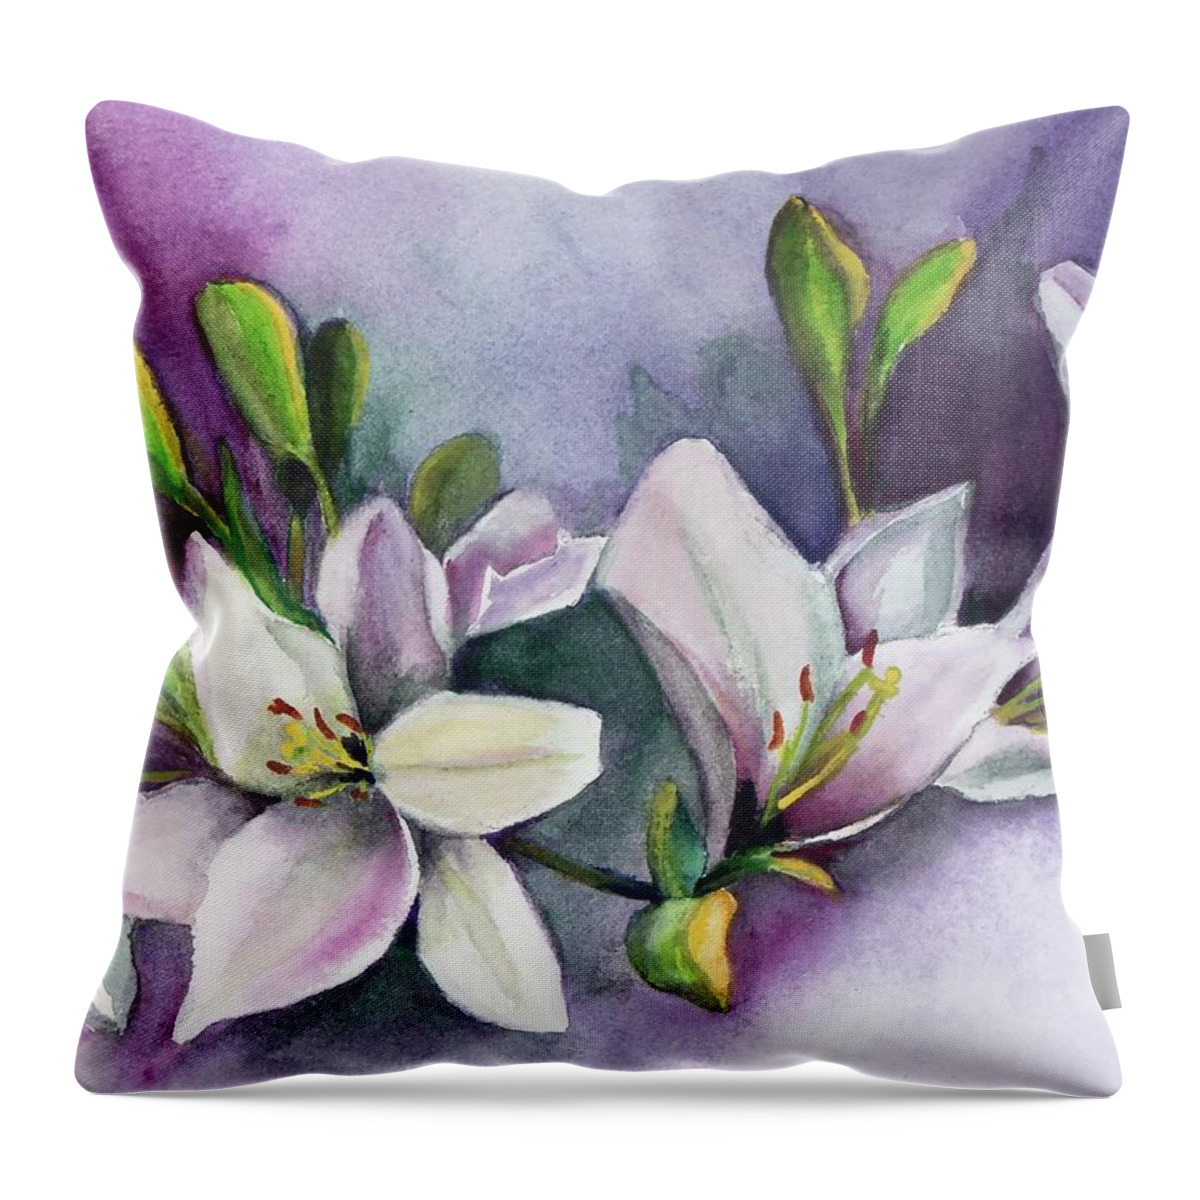 Still Life Throw Pillow featuring the painting White Flower by Marsha Woods